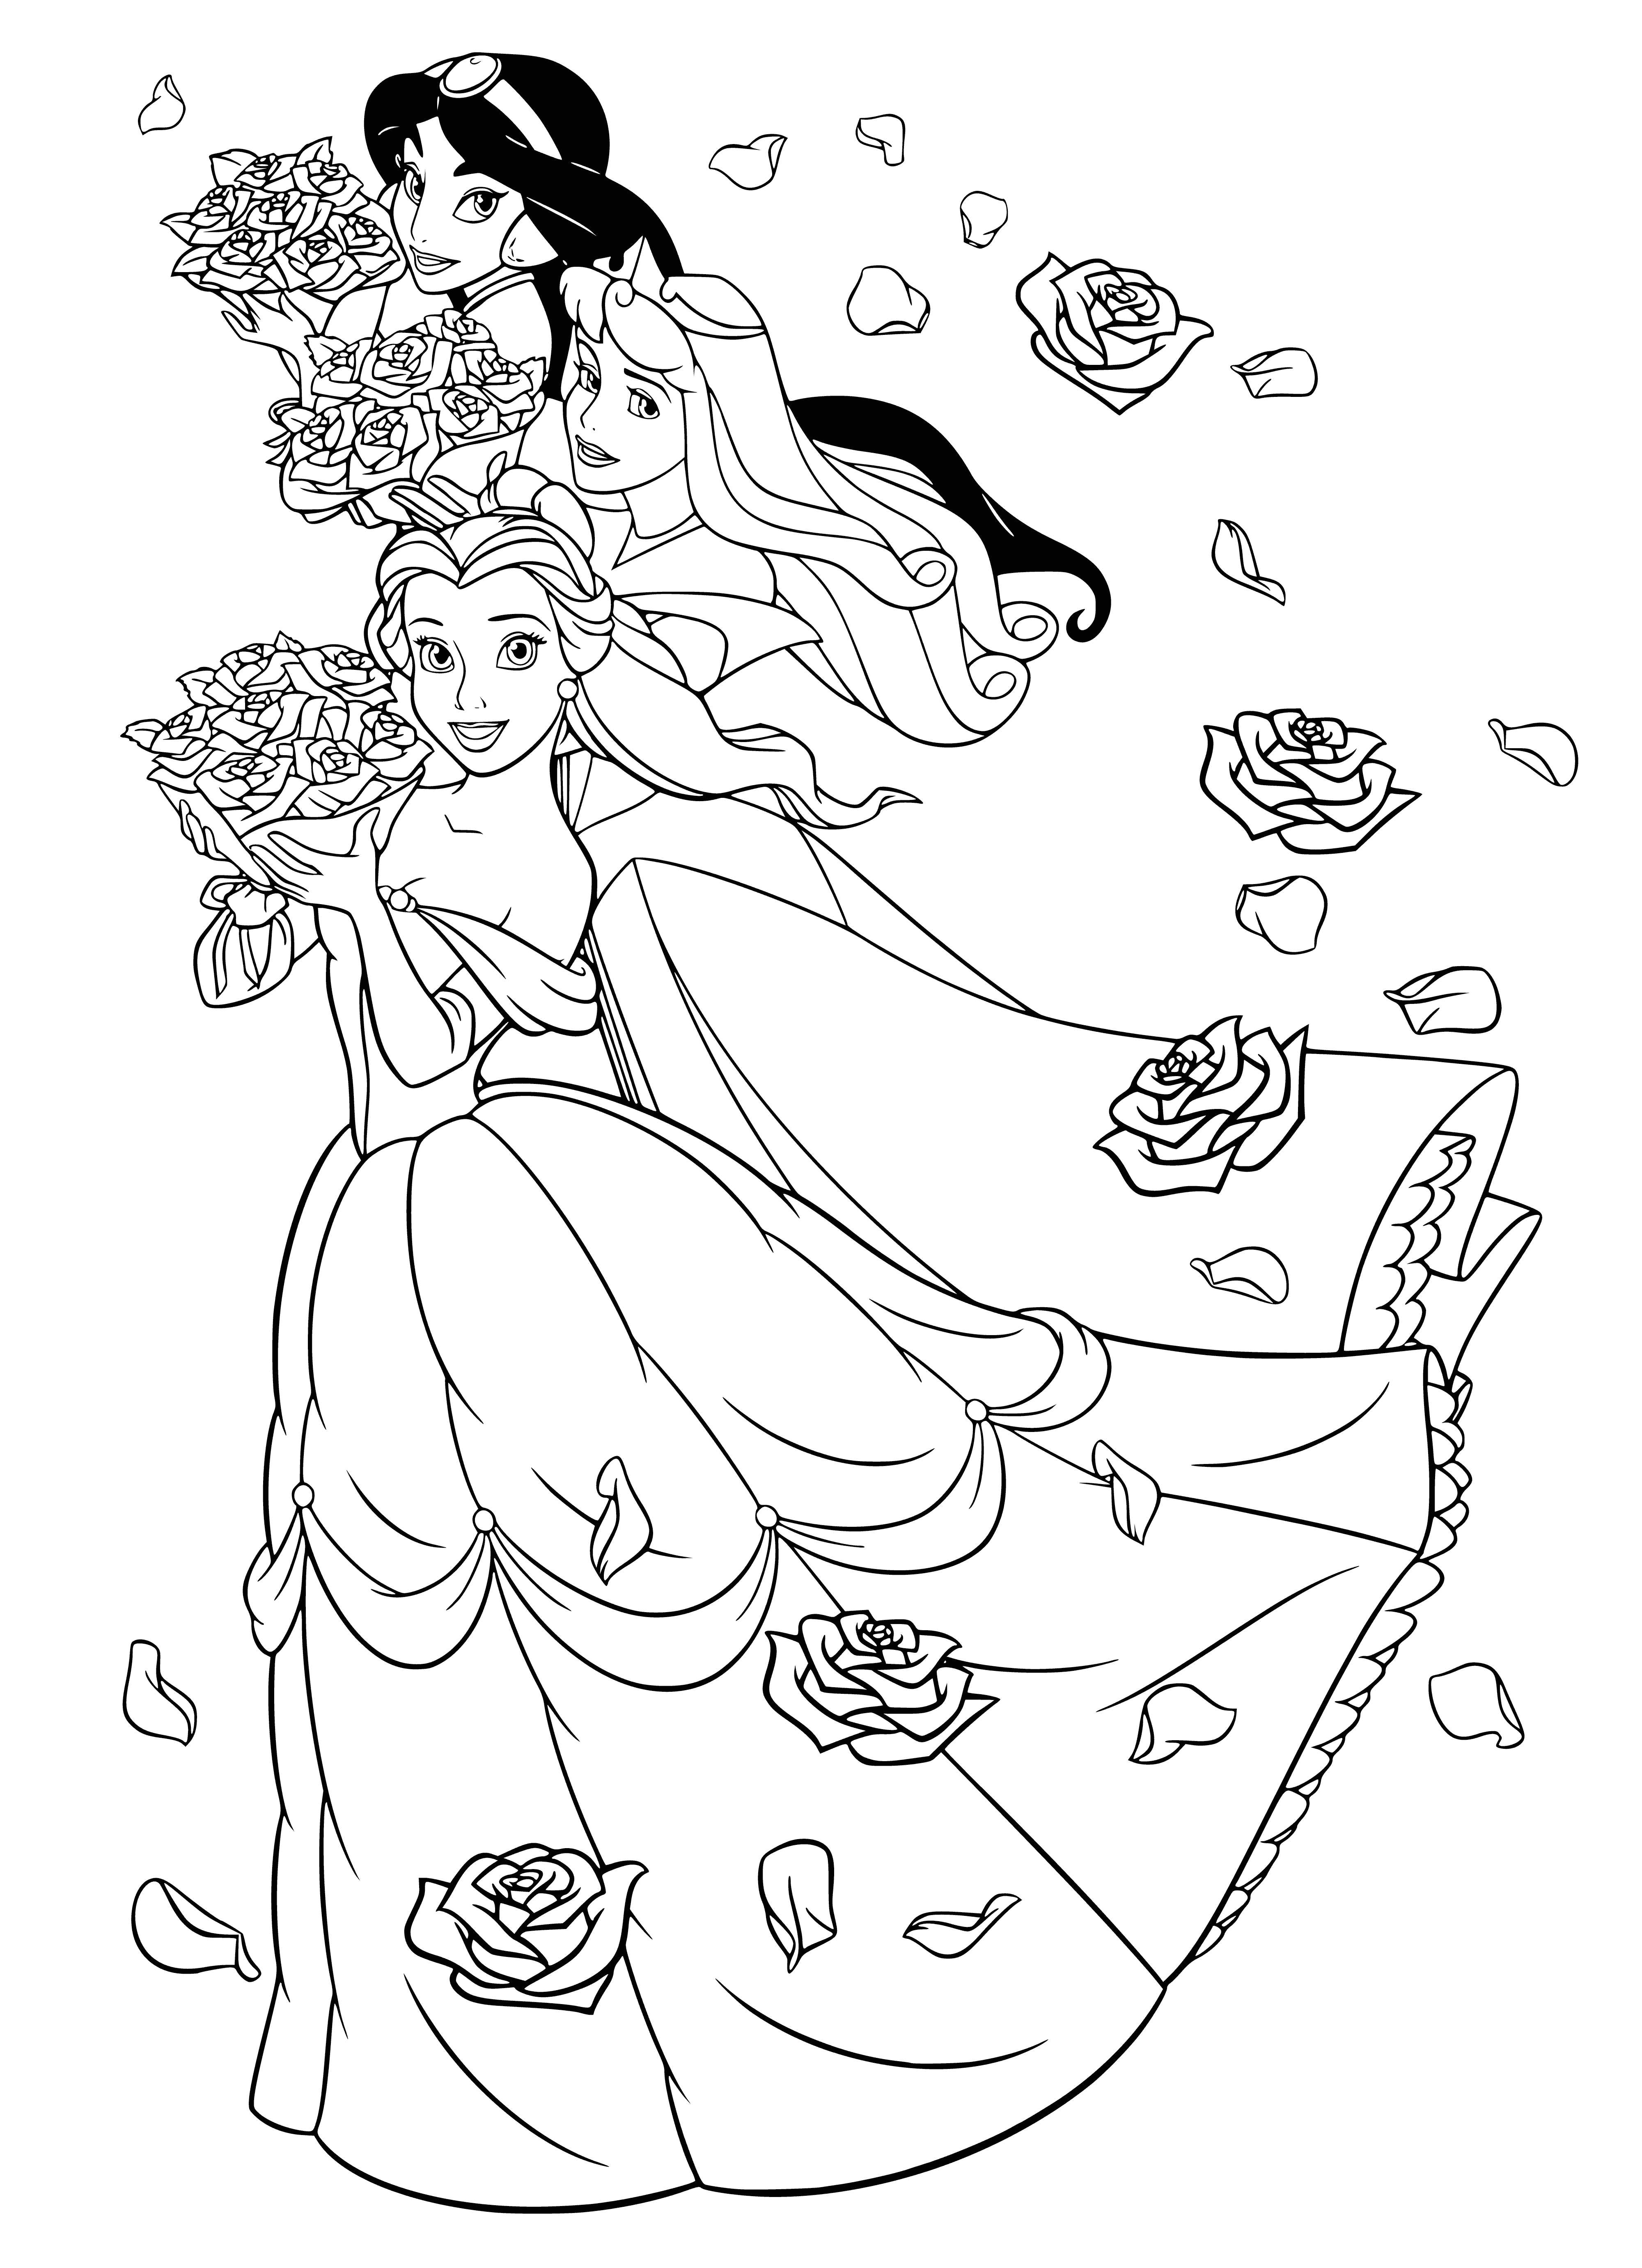 coloring page: 3 Princesses: Belle, Avora & Jasmine, each wear unique outfits and have different hair & eye colors.